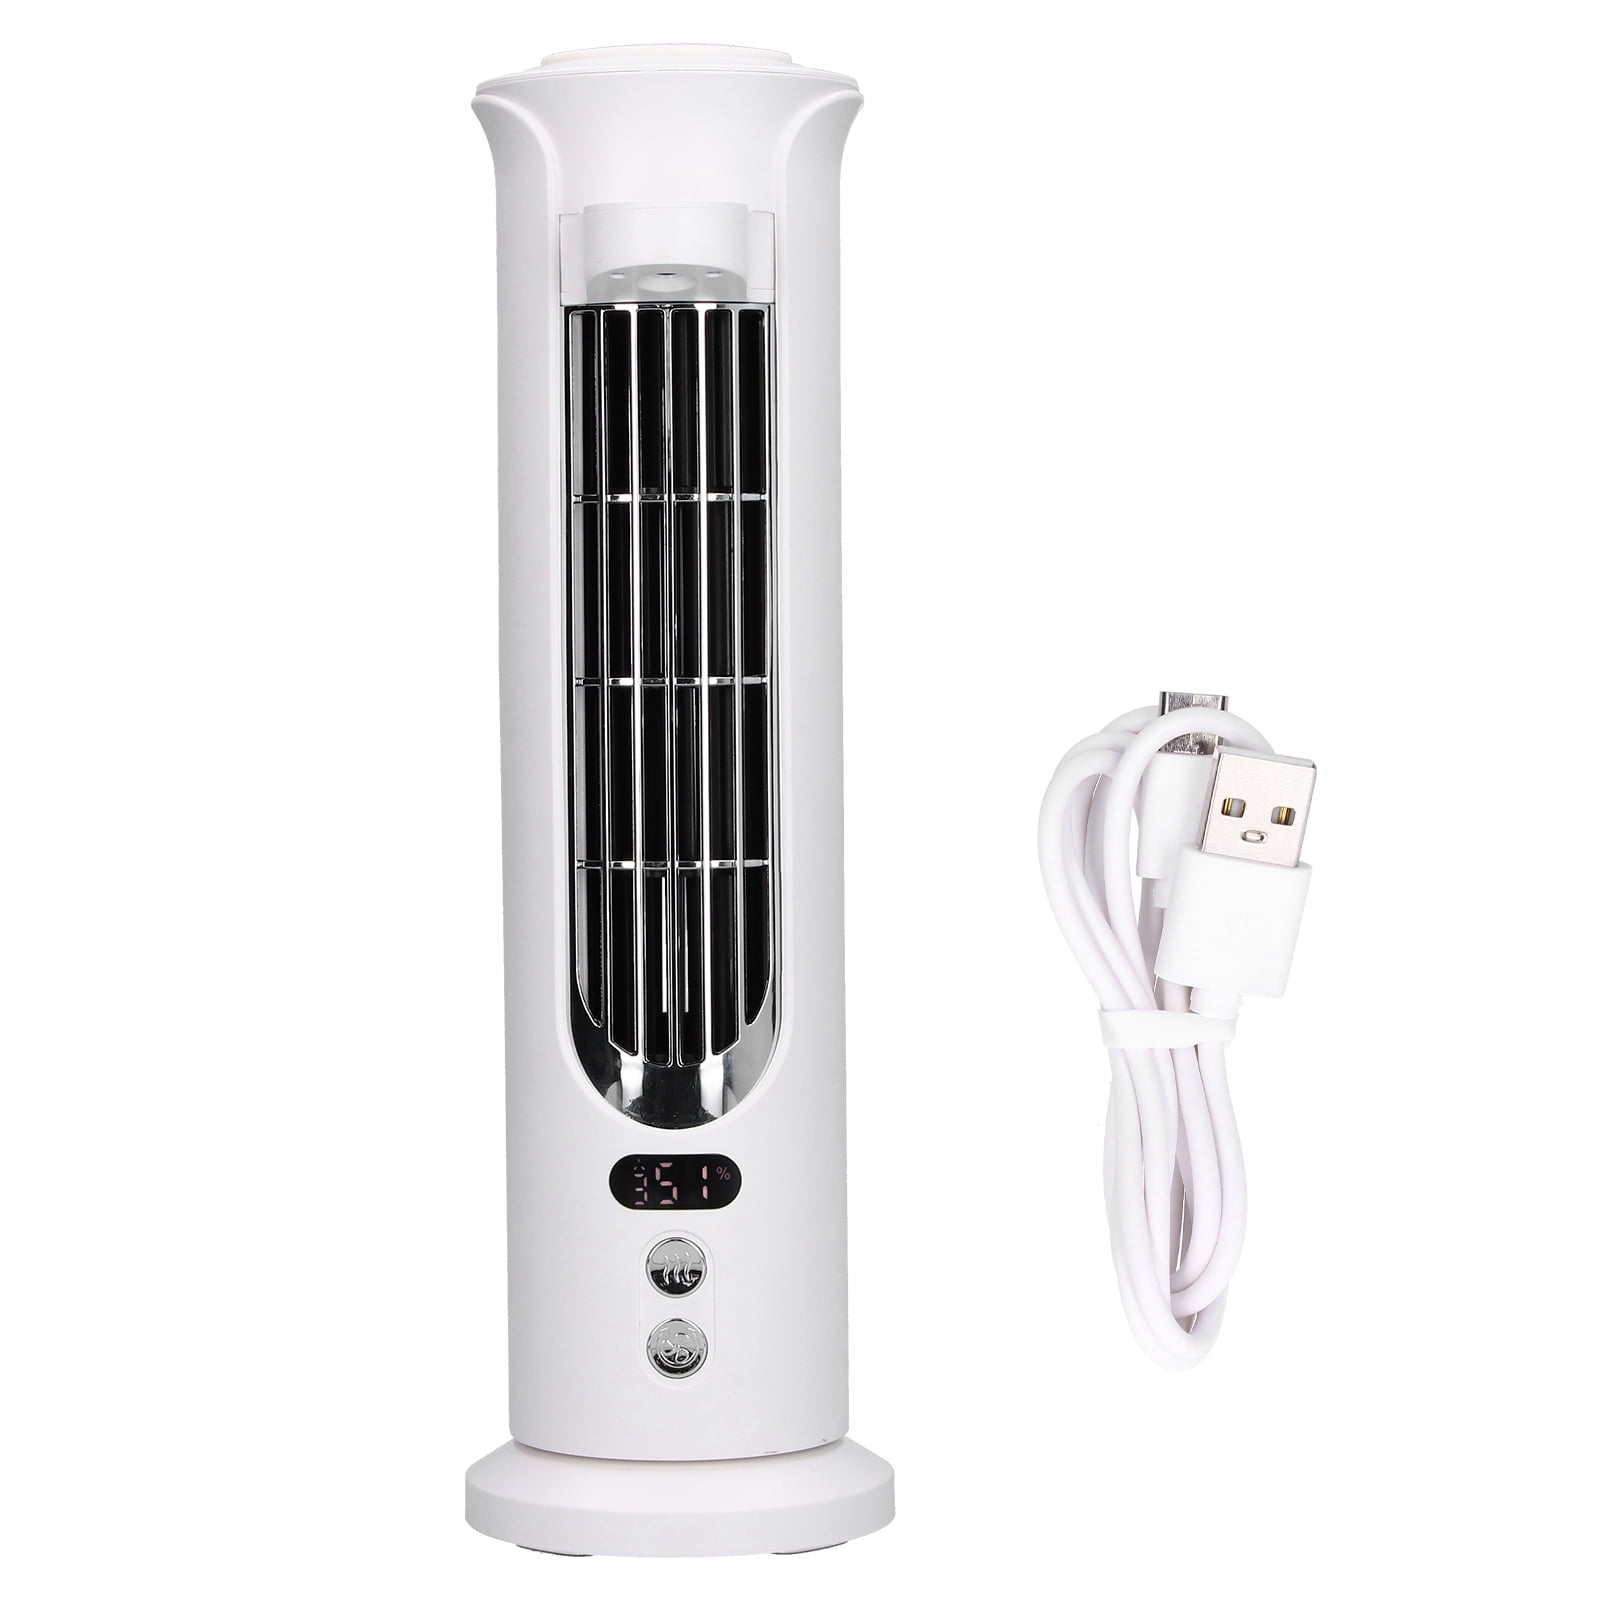 White Portable Tower Fan,XHONG Oscillating Tower Fan,Mini USB Cooling Air Conditioner Bladeless Tower Fan with 2-Speed Digital Control for Home and Office 